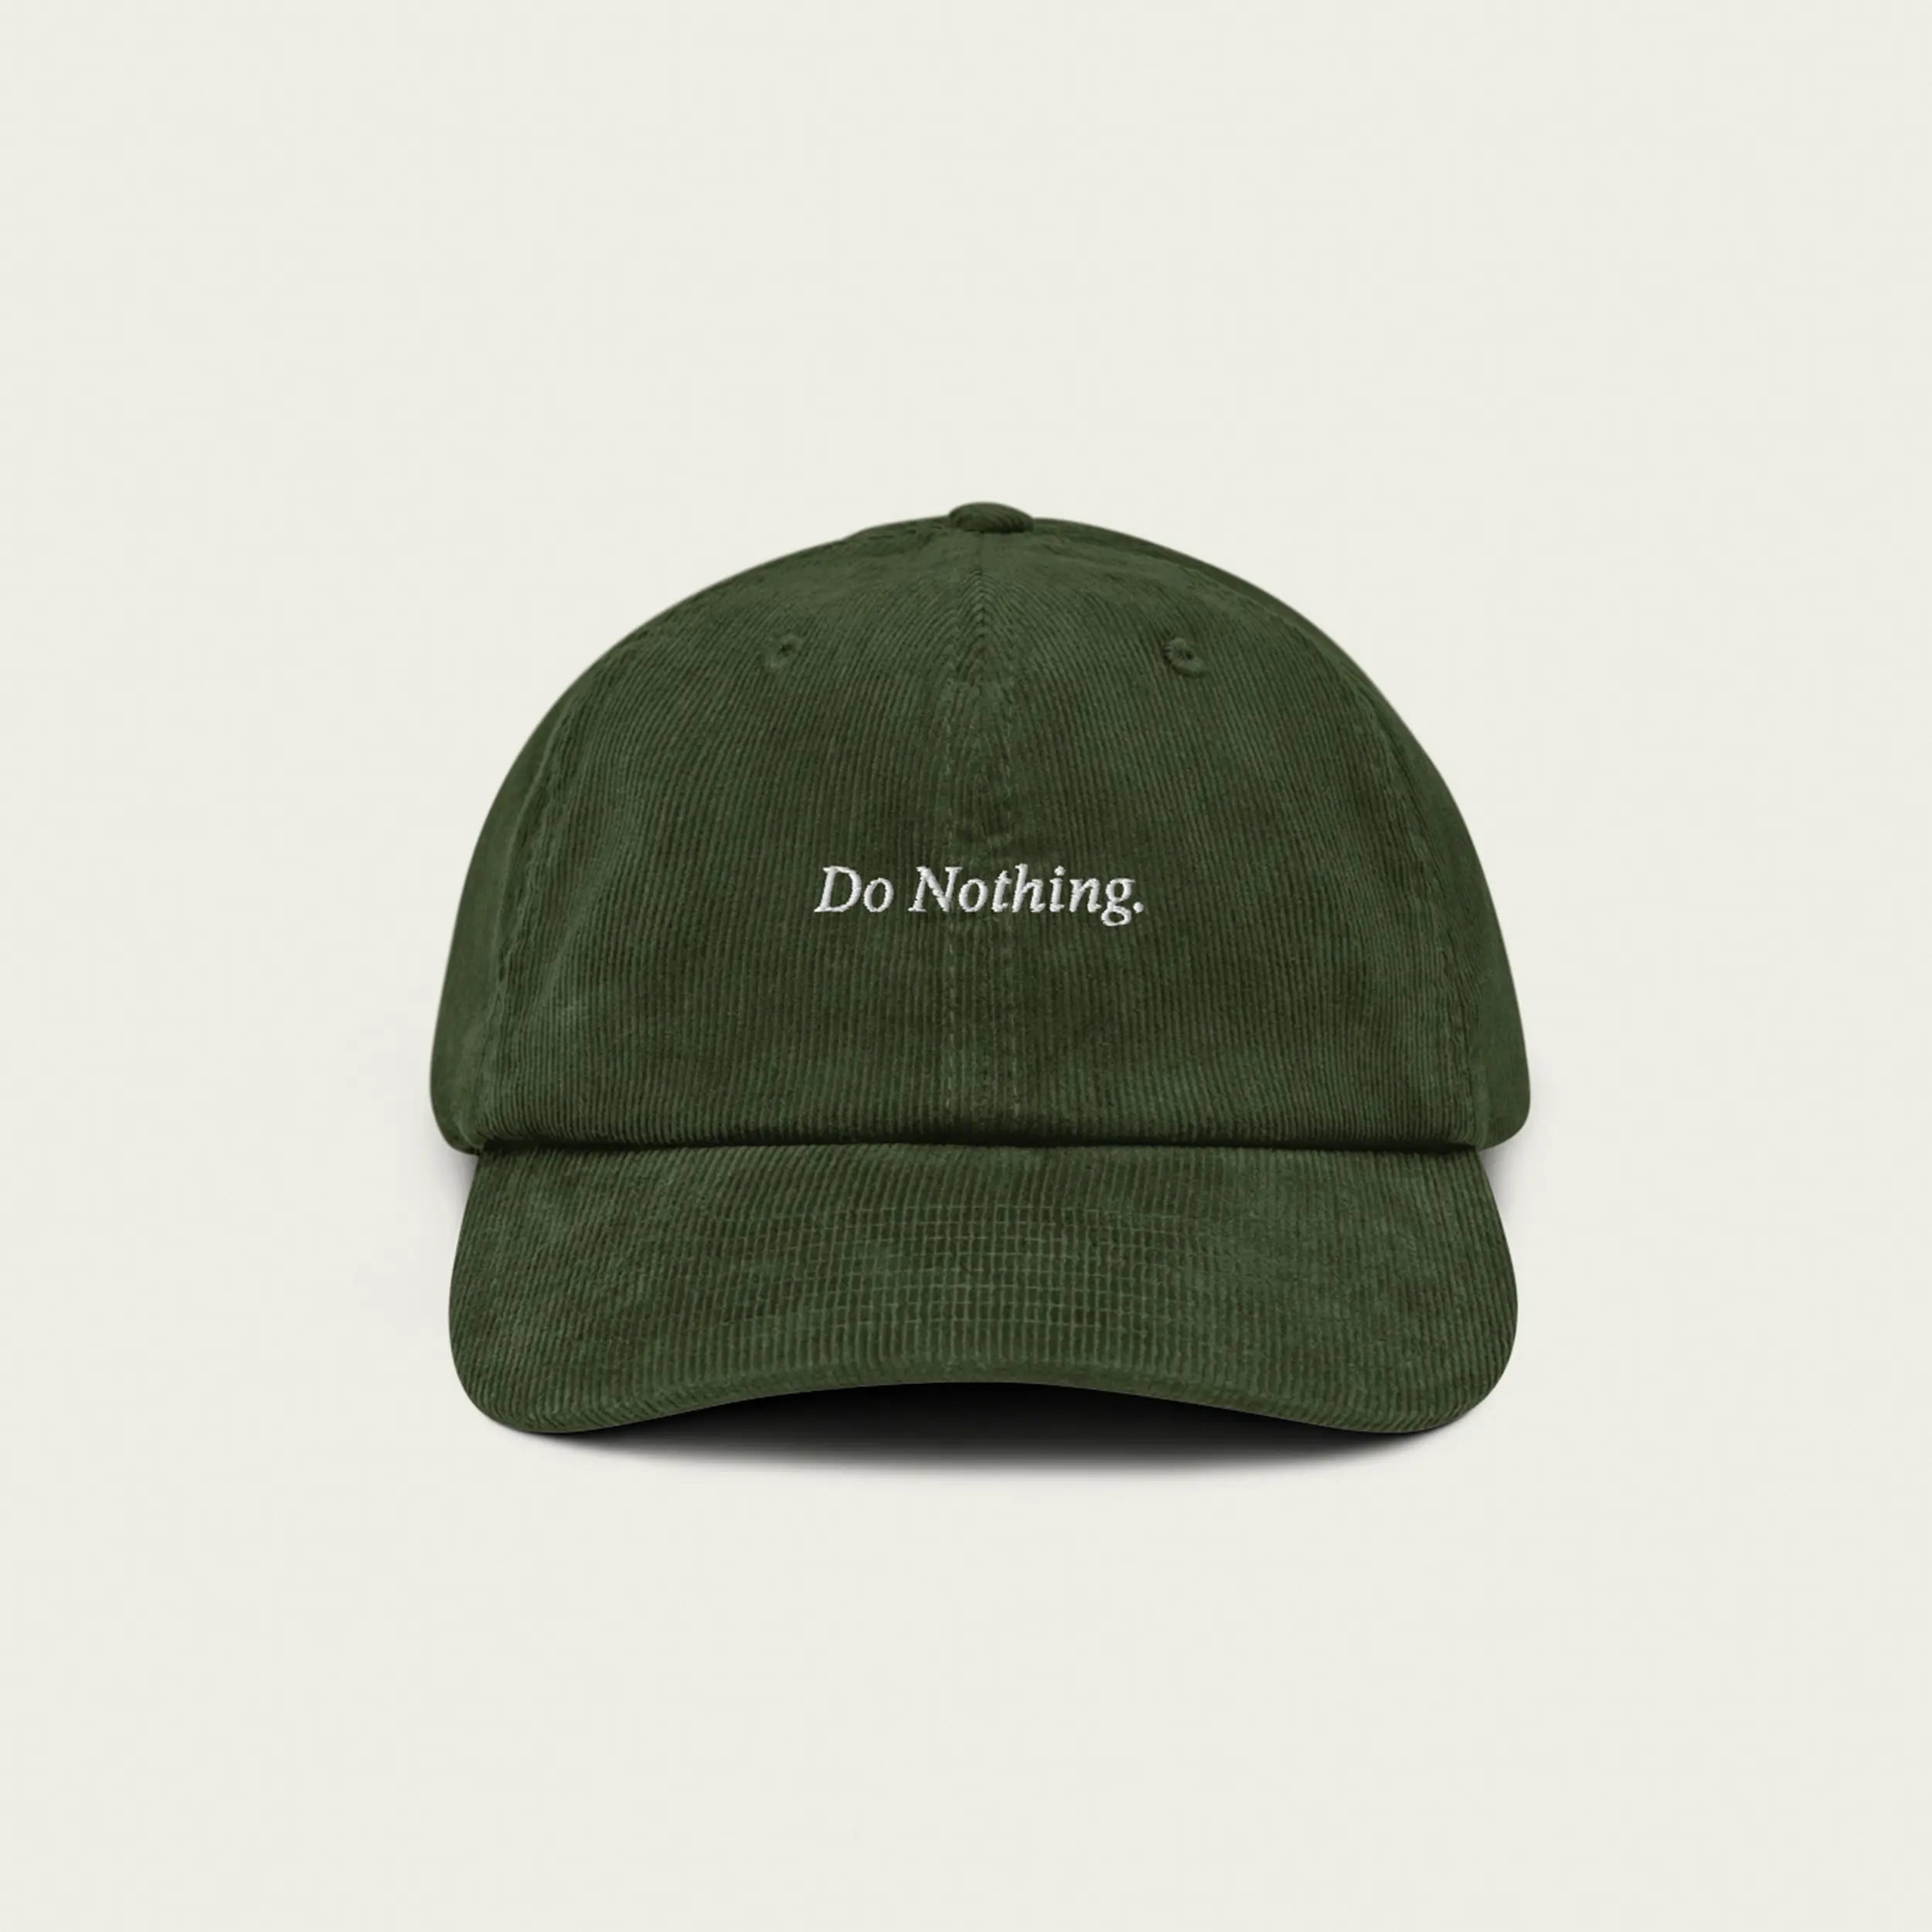 Session Goods 'Do Nothing' Green Corduroy Hat